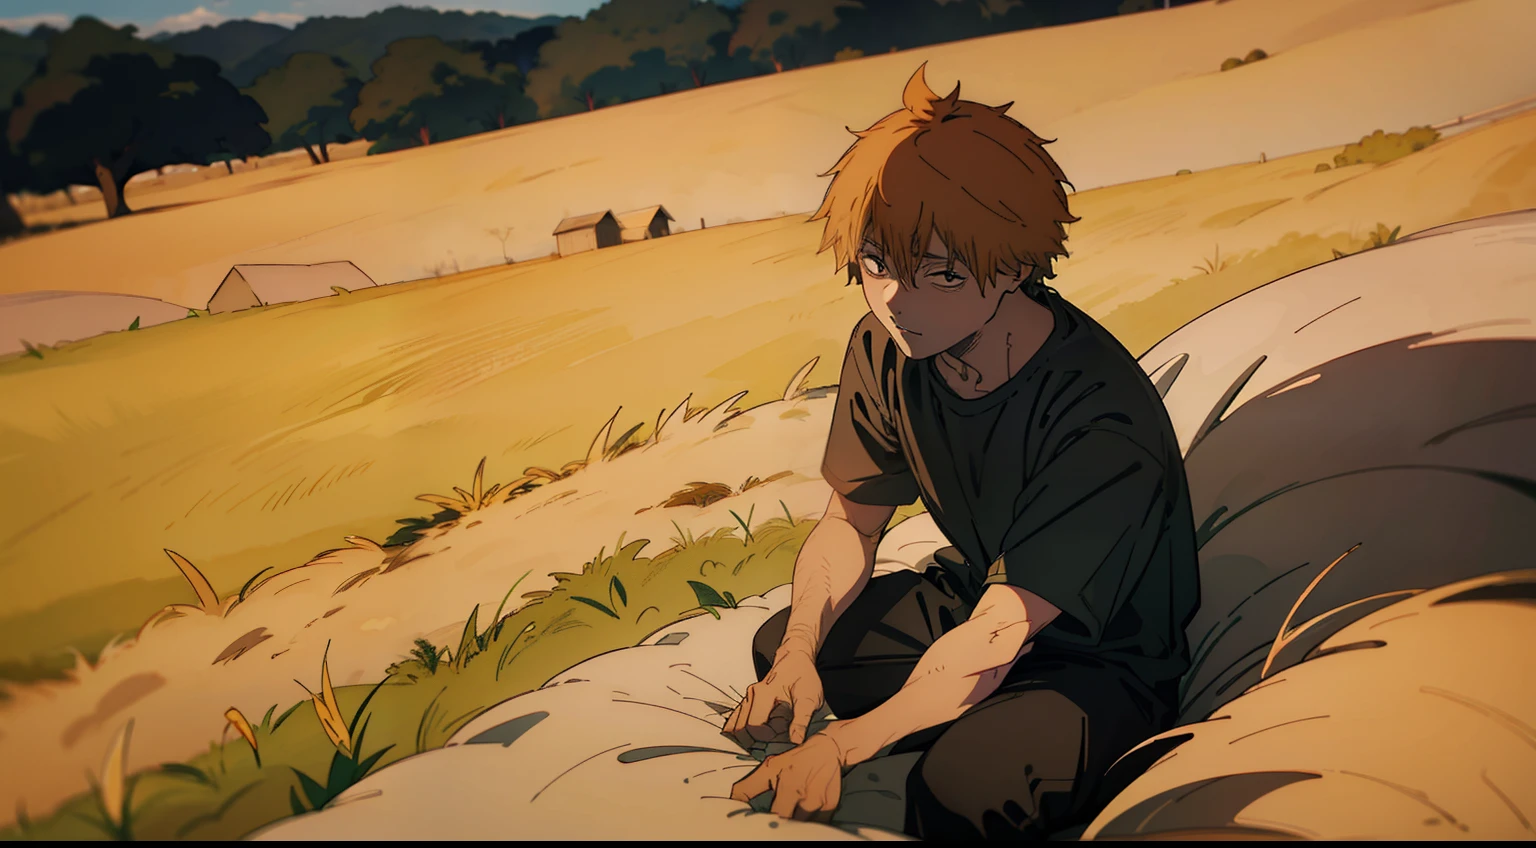 denji with a scared expression in a field